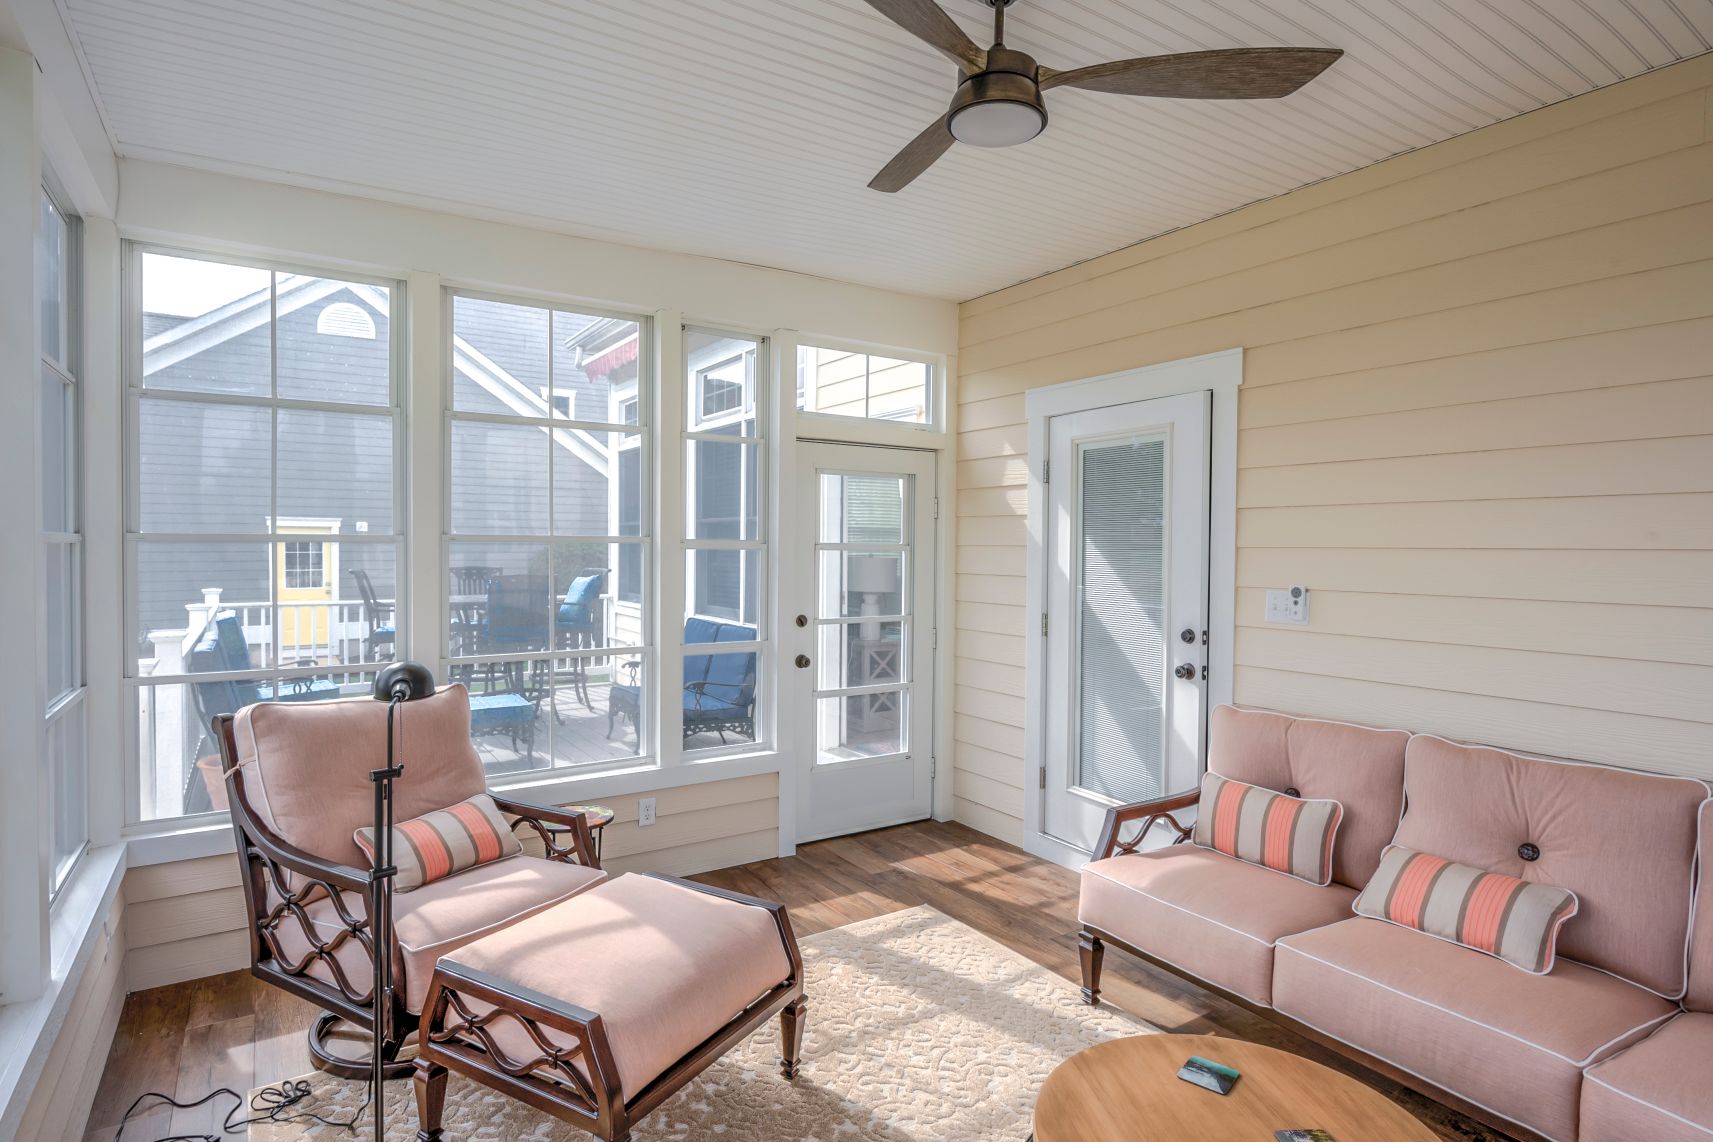 October Glory Exterior in Ocean View DE - Sunroom with Cozy Vintage Soft Furniture